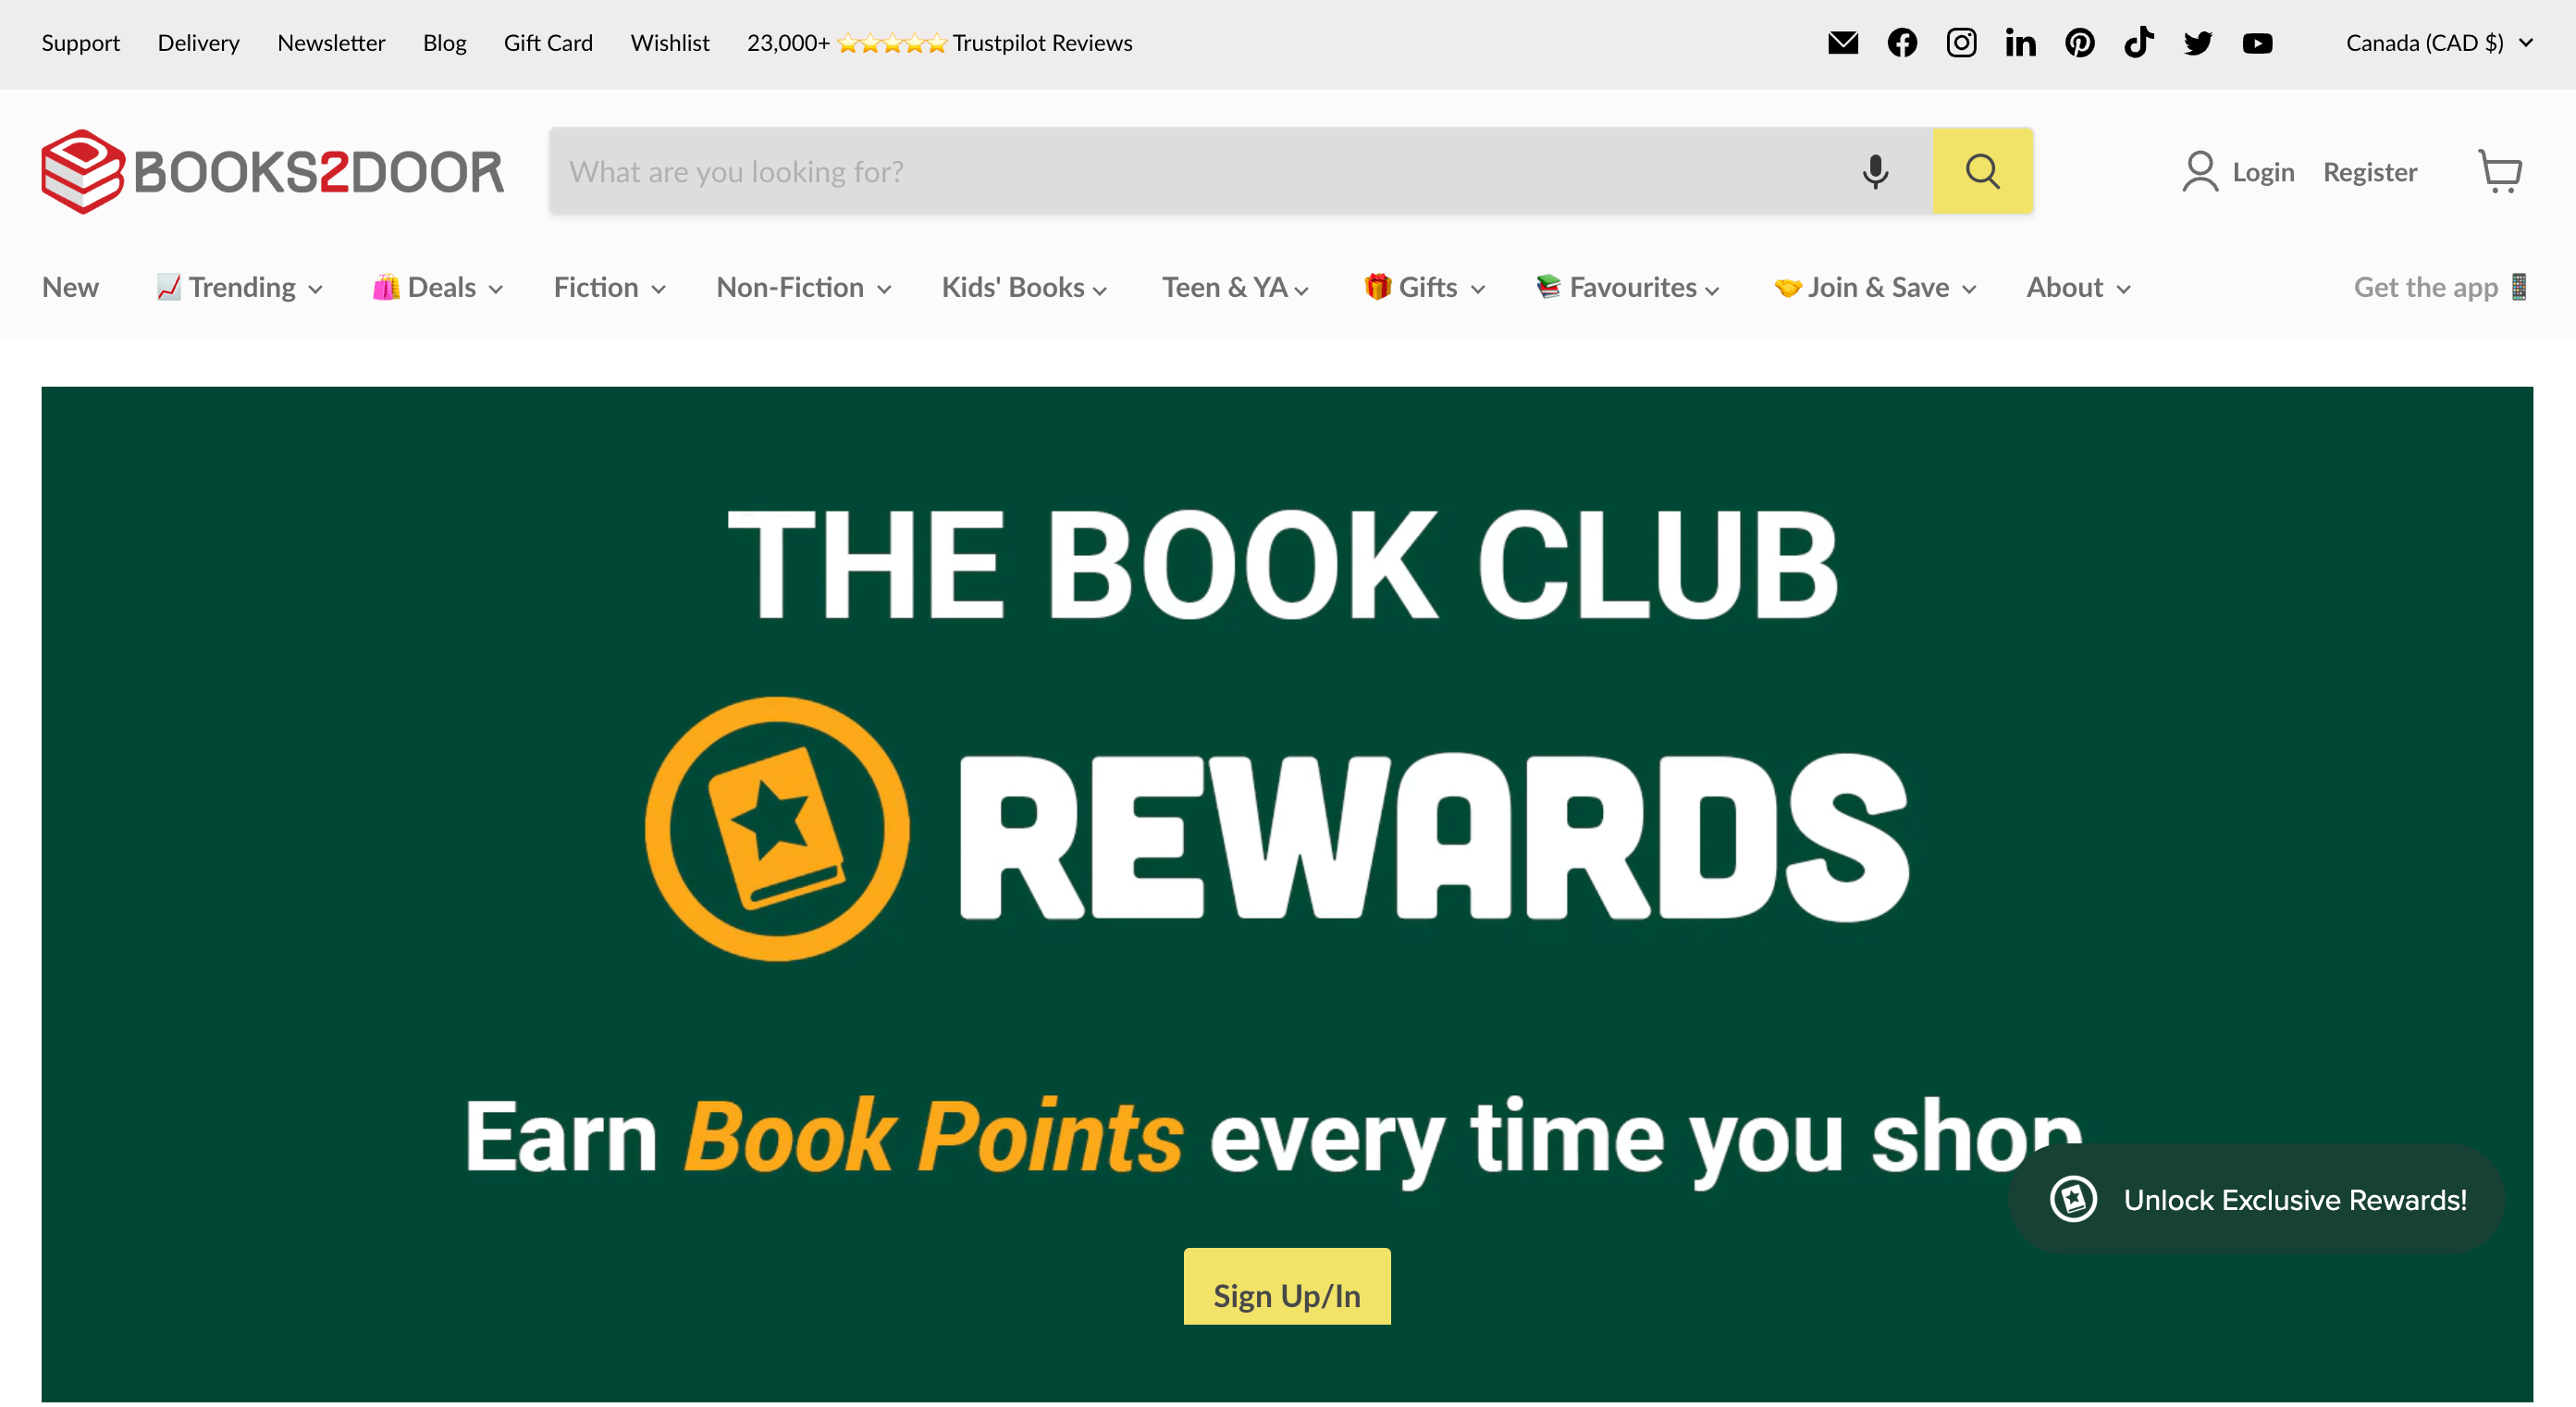 A screenshot from The Book Club’s rewards program explainer page. There is a call to action to sign up or sign in to the program. 